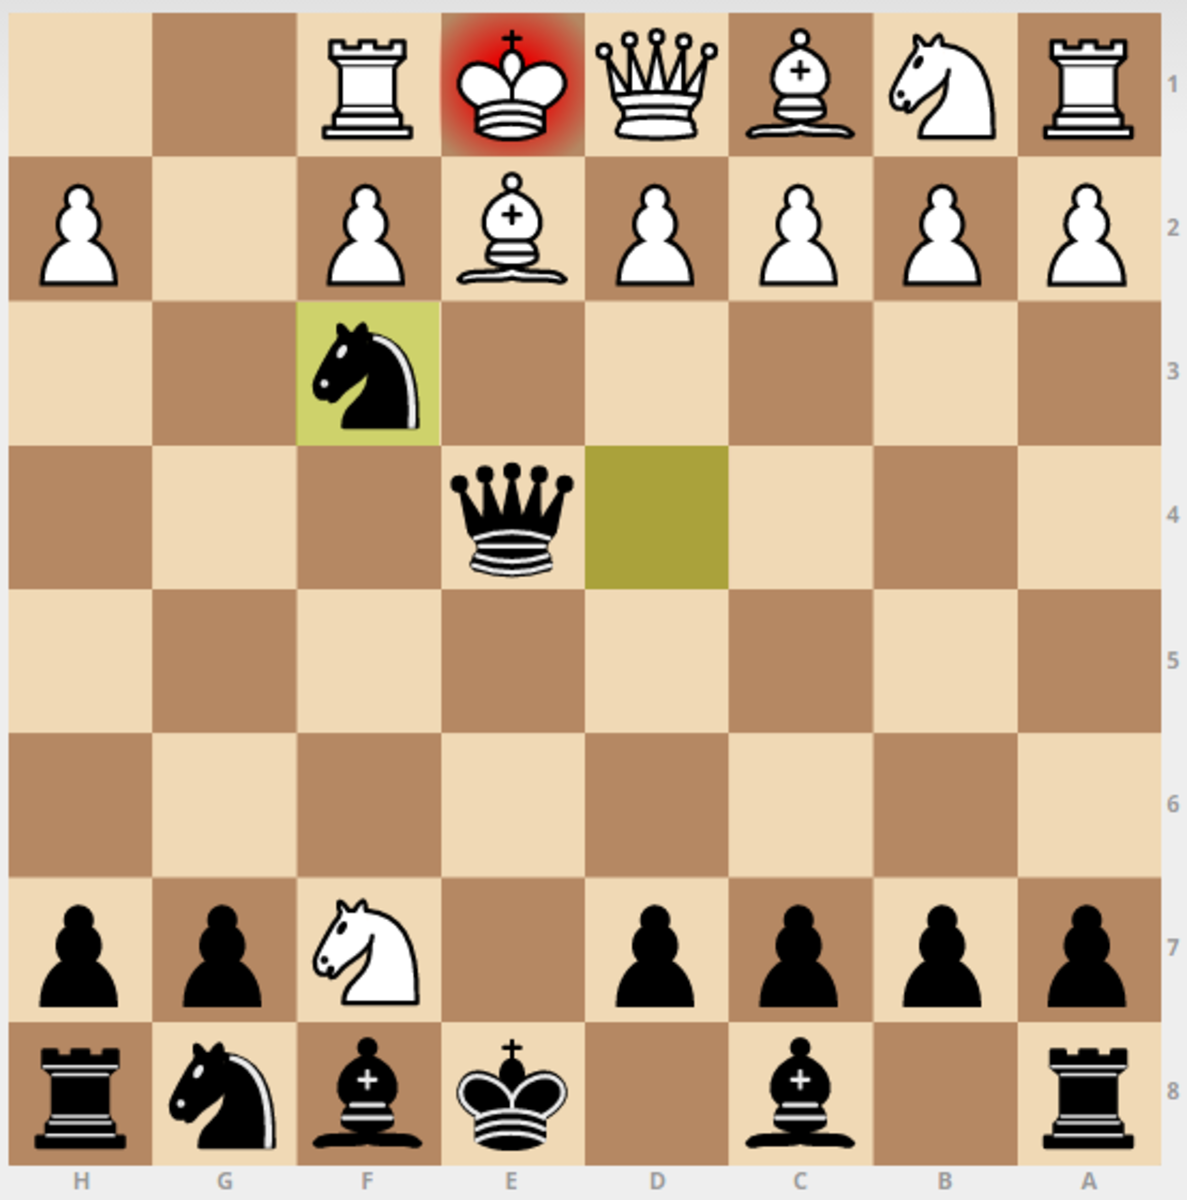 Smothered Mate In 7!? The Blackburne Shilling Gambit 